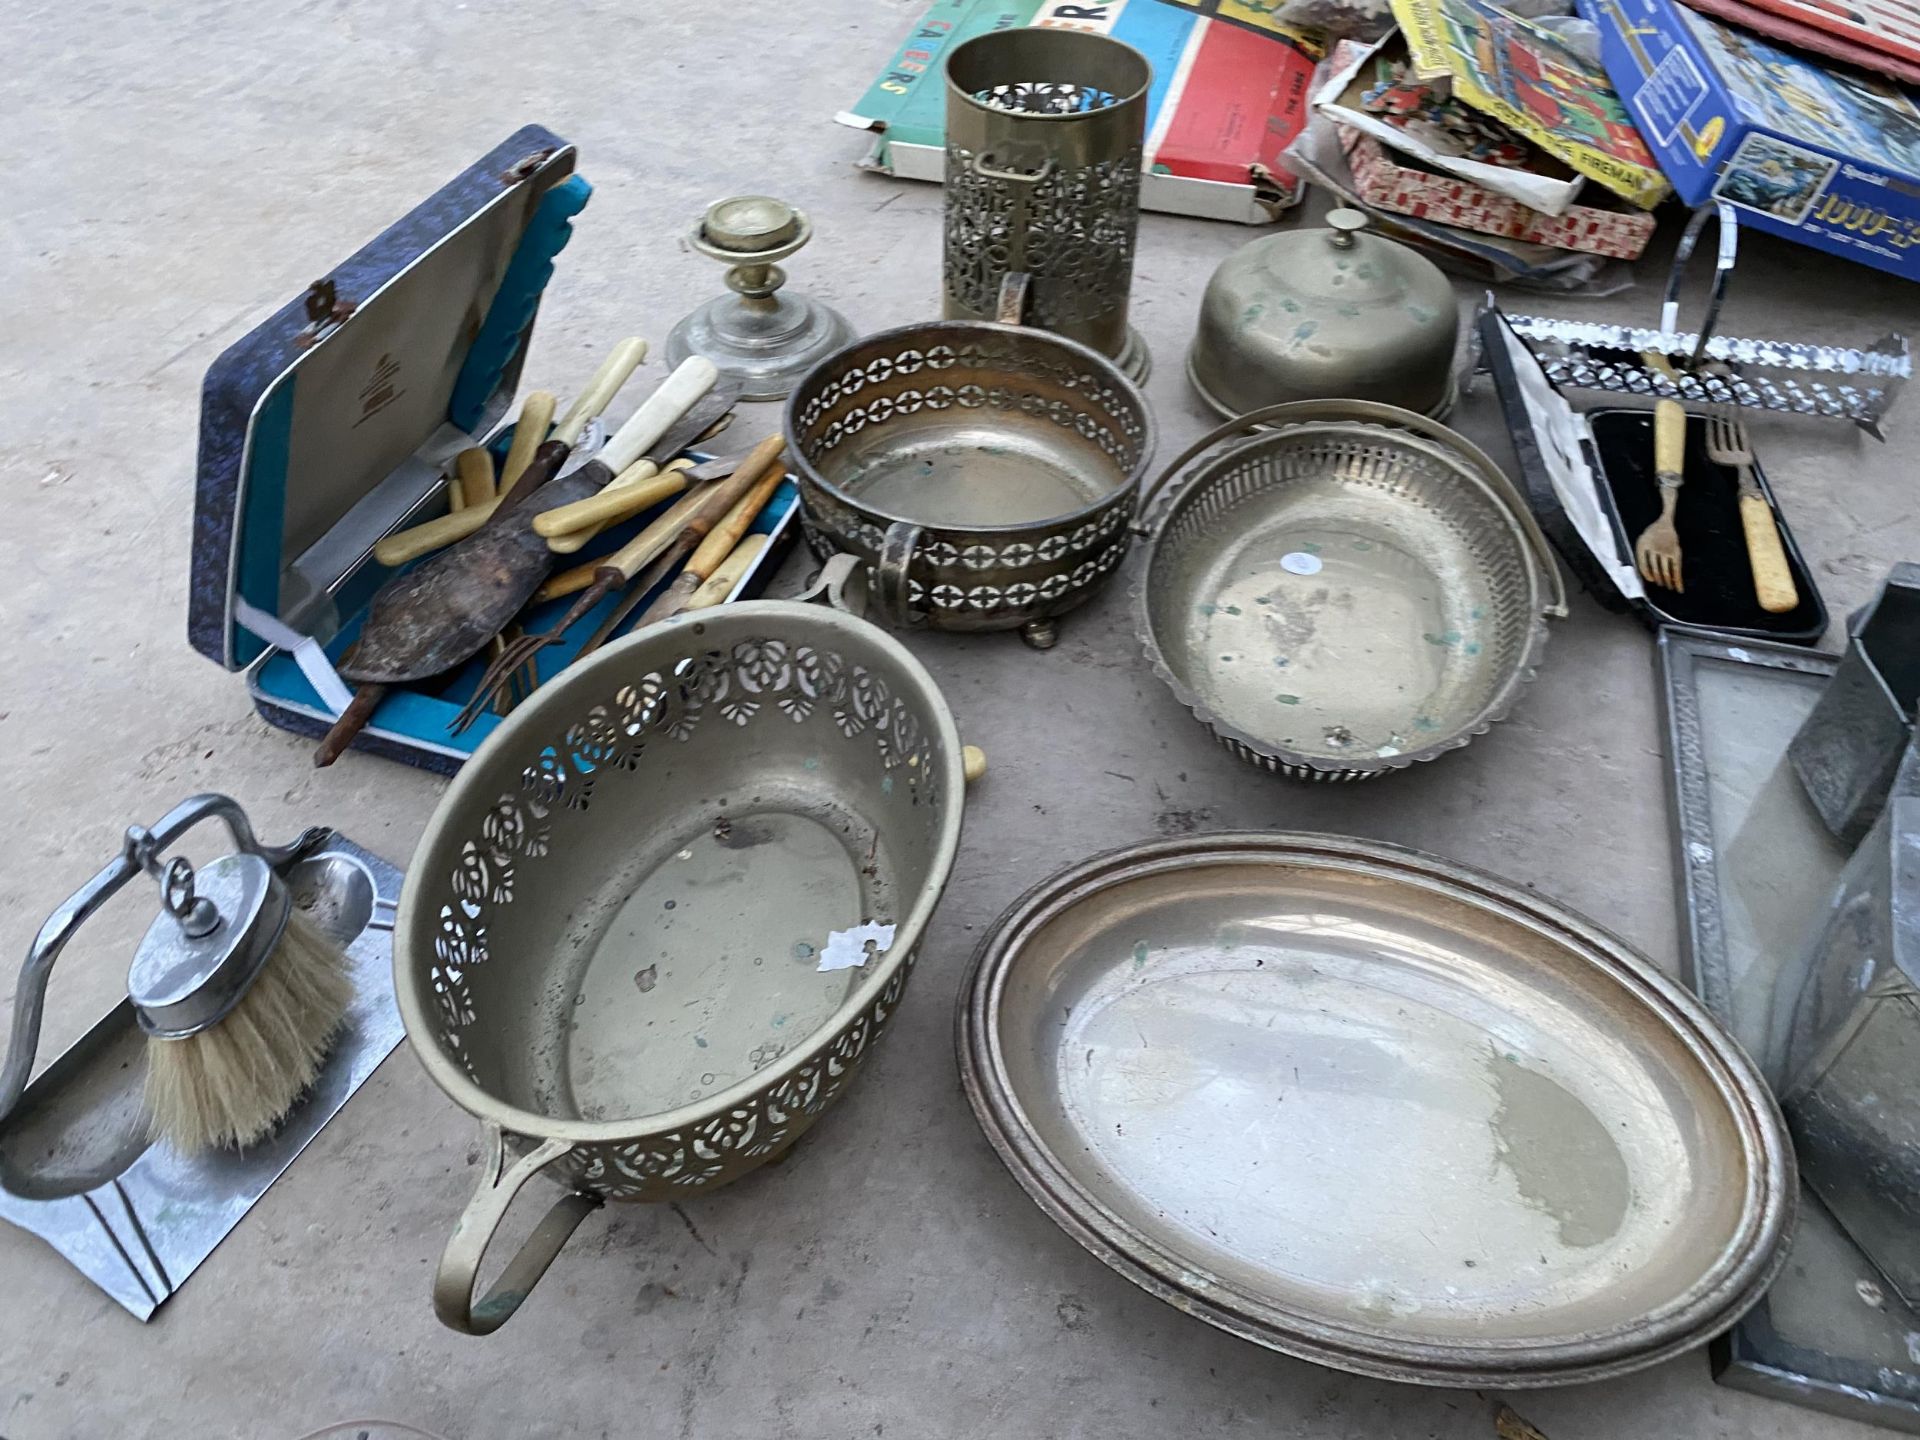 A LARGE ASSORTMENT OF ITEMS TO INCLUDE A PEWTER TEASET, DISHES AND FLATWARE ETC - Image 3 of 3